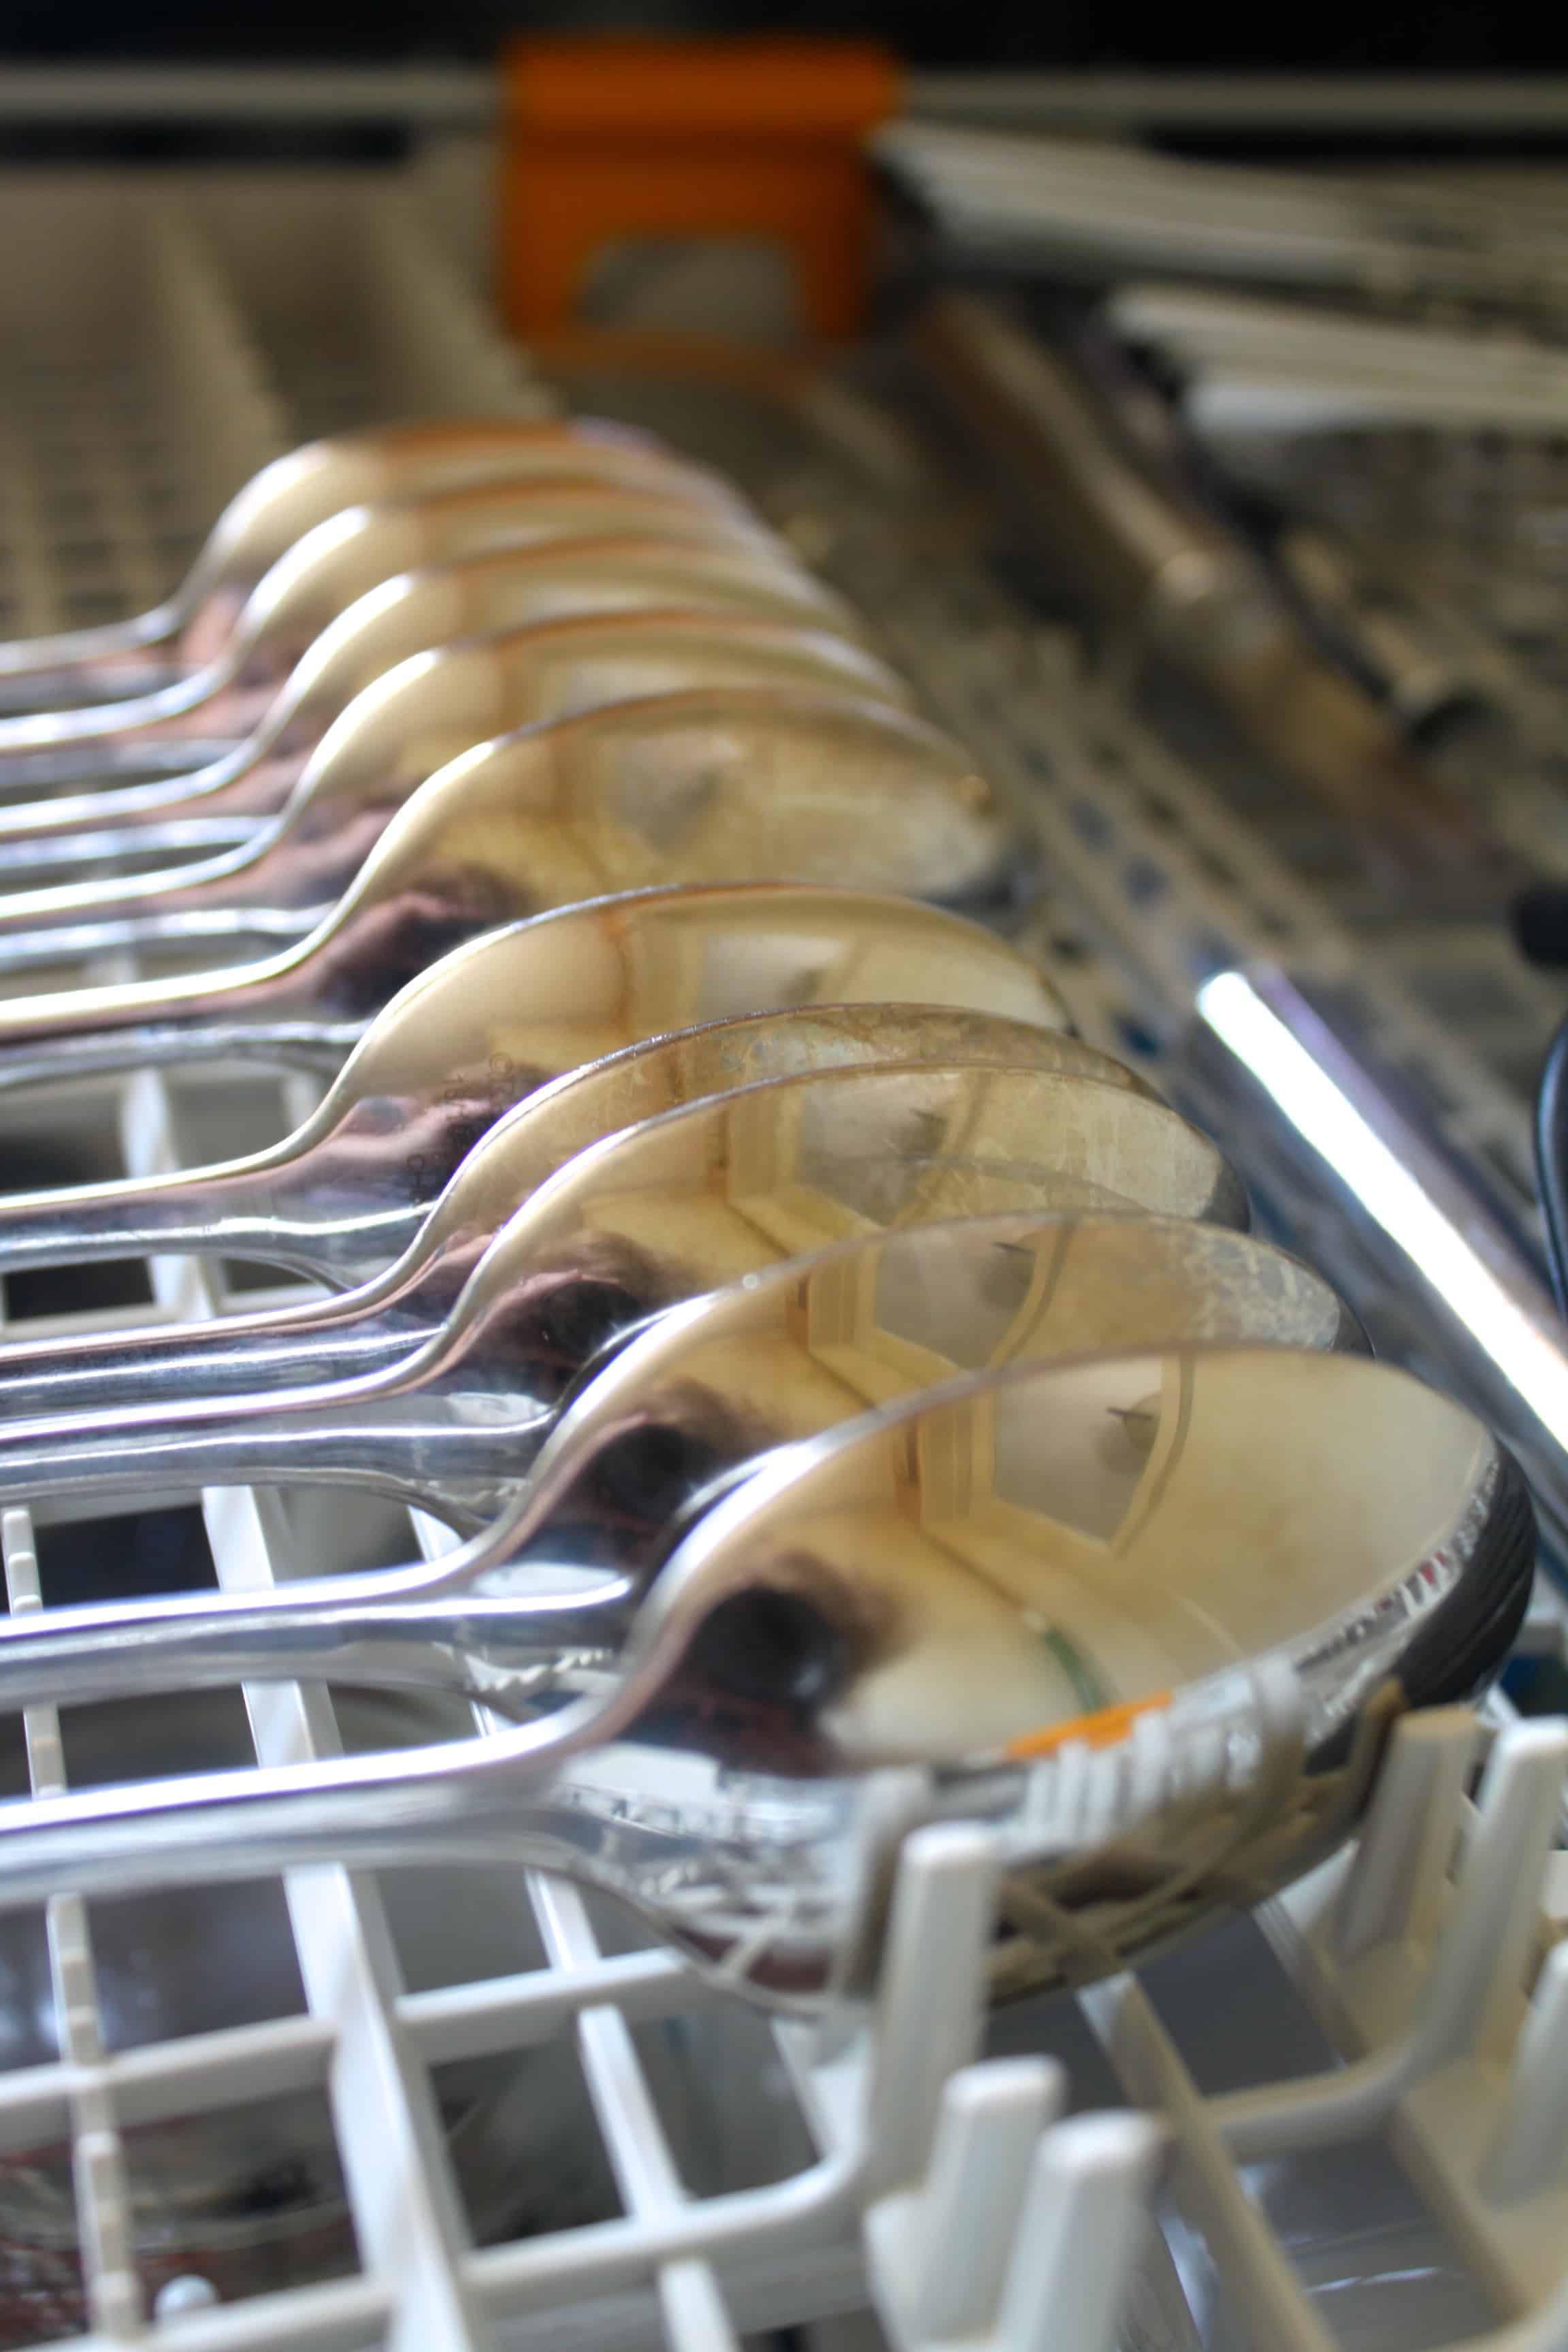 spoons lined up inside the third rack of a Miele dishwasher